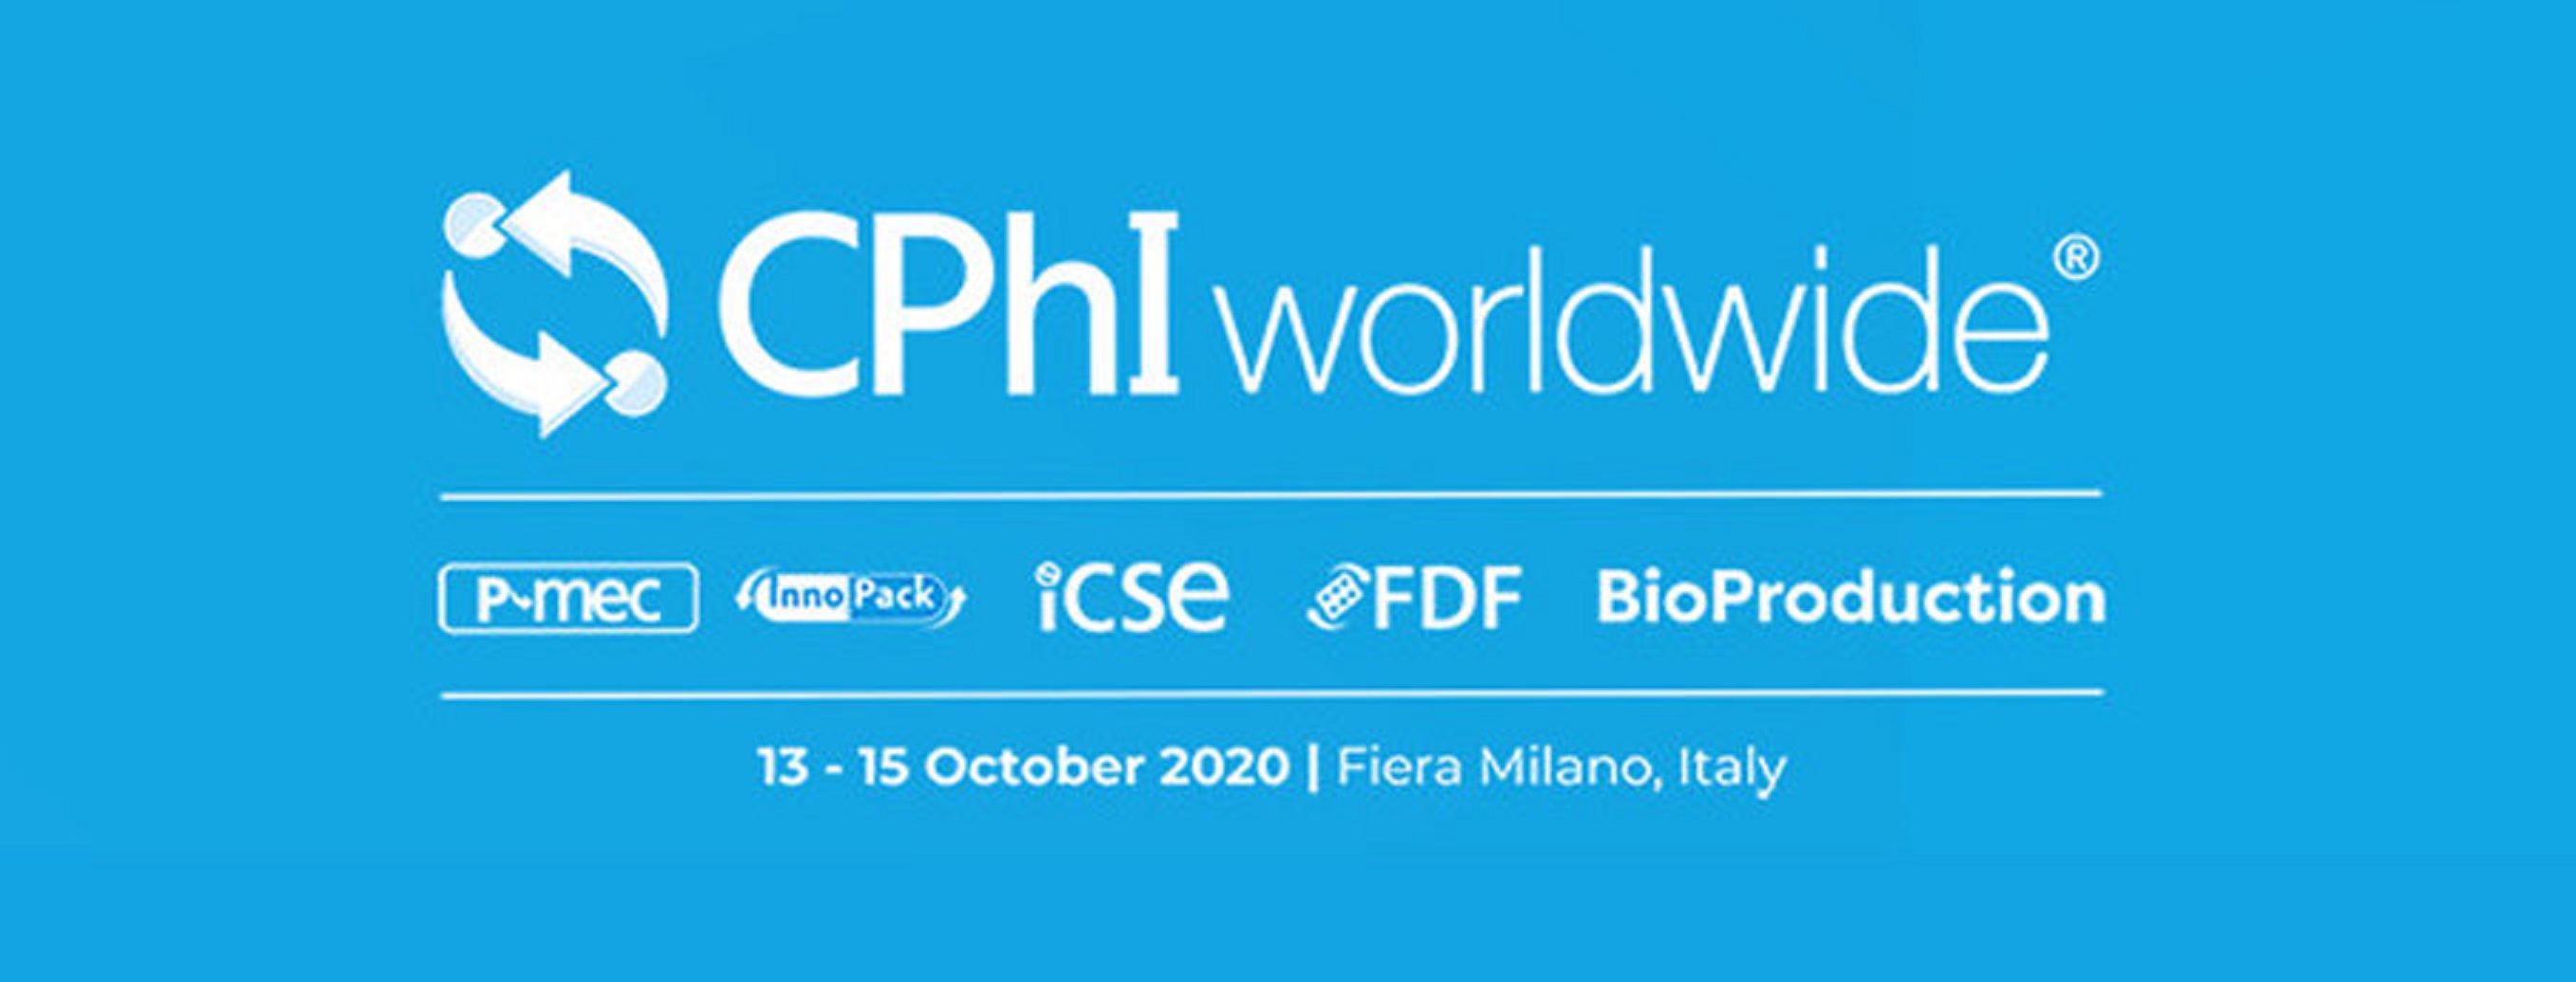 CPhI plans 'Pharma Festival' digital experience to replace postponed worldwide event